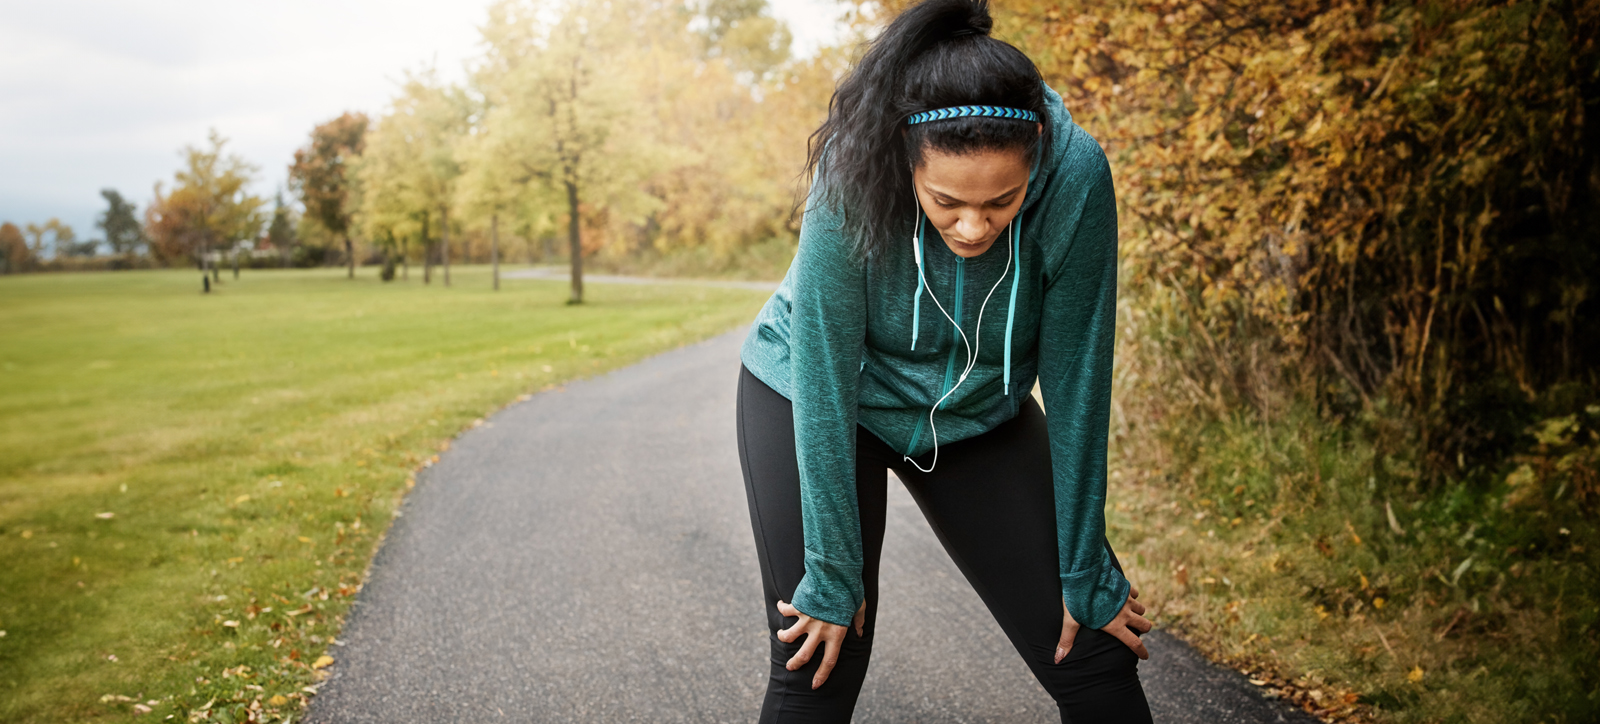 A tired runner stands with her hands on her knees, struggling to get her breath back. Nudging could help keep her exercising